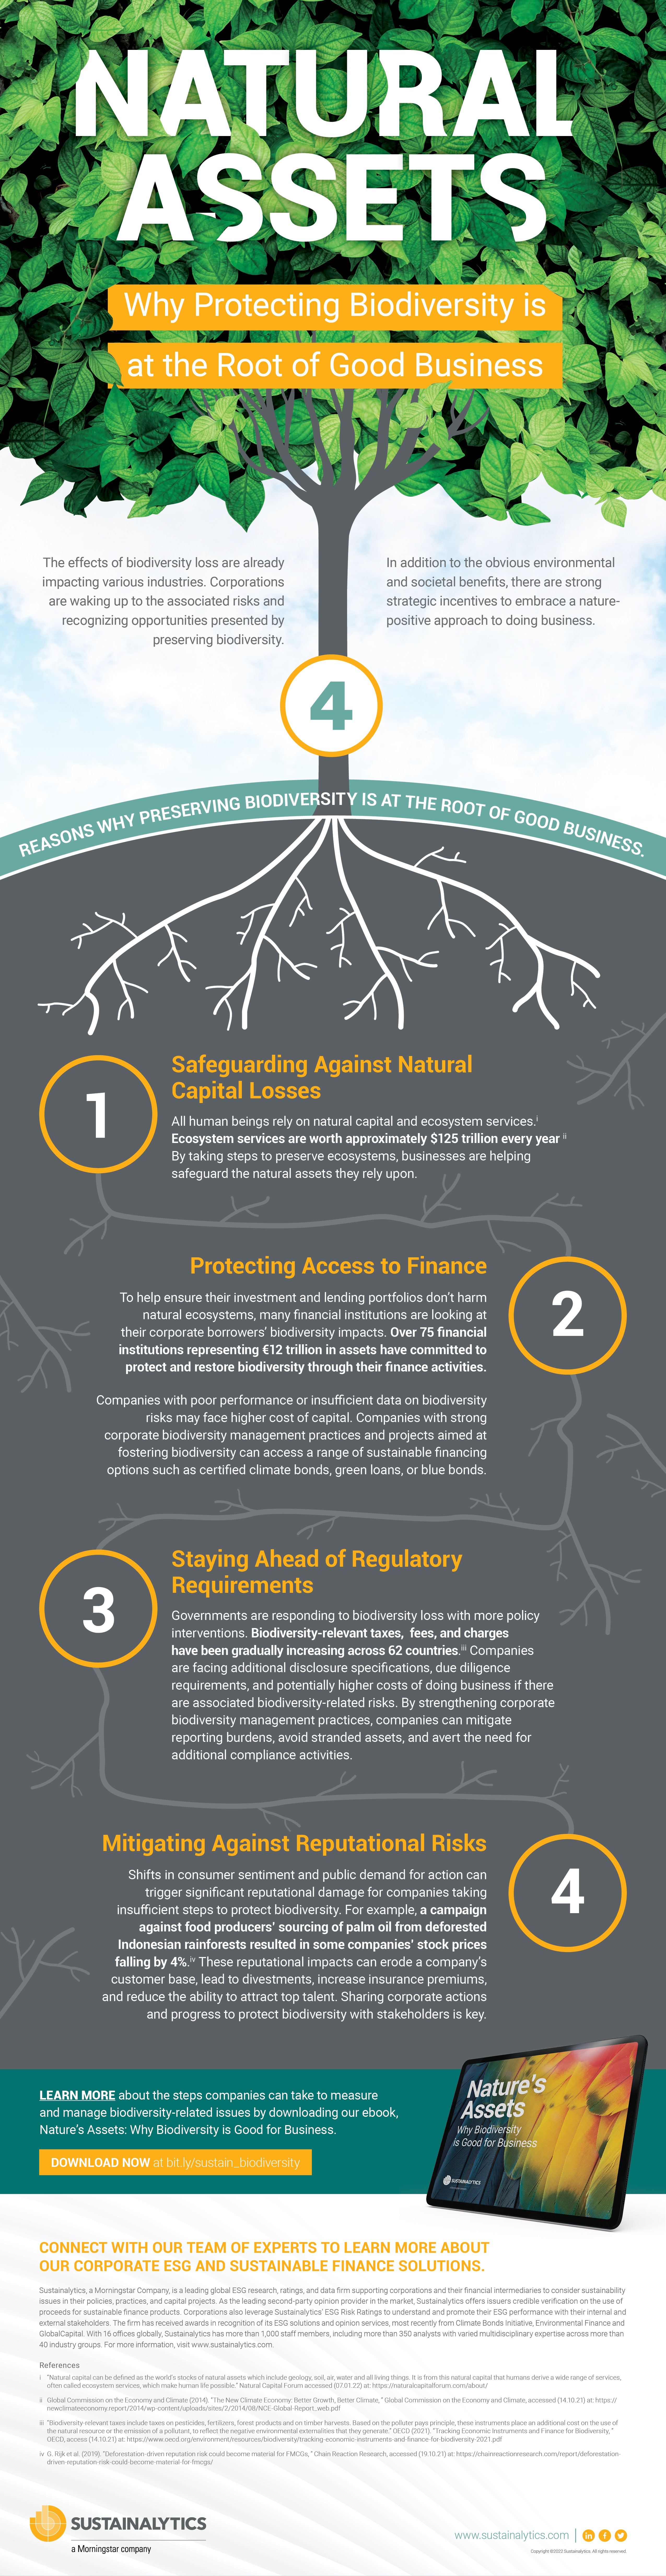 Download our infographic: Why Protecting Biodiversity is at the Root of Good Business